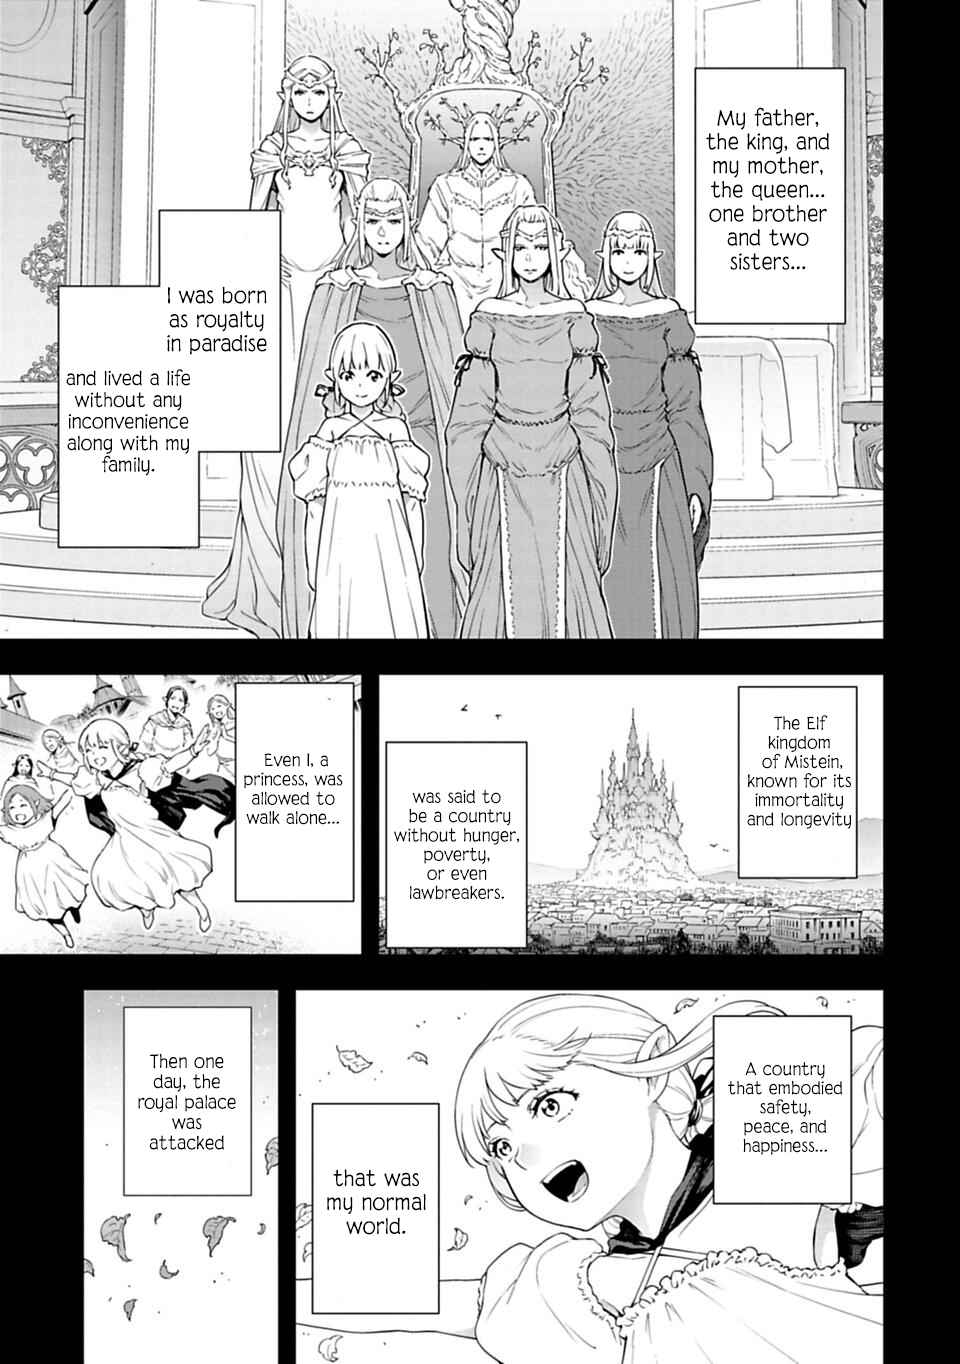 Another World In Japan ~The Third Son Of The Assassin Family Reigns Supreme In A Transformed Japan~ - Page 4